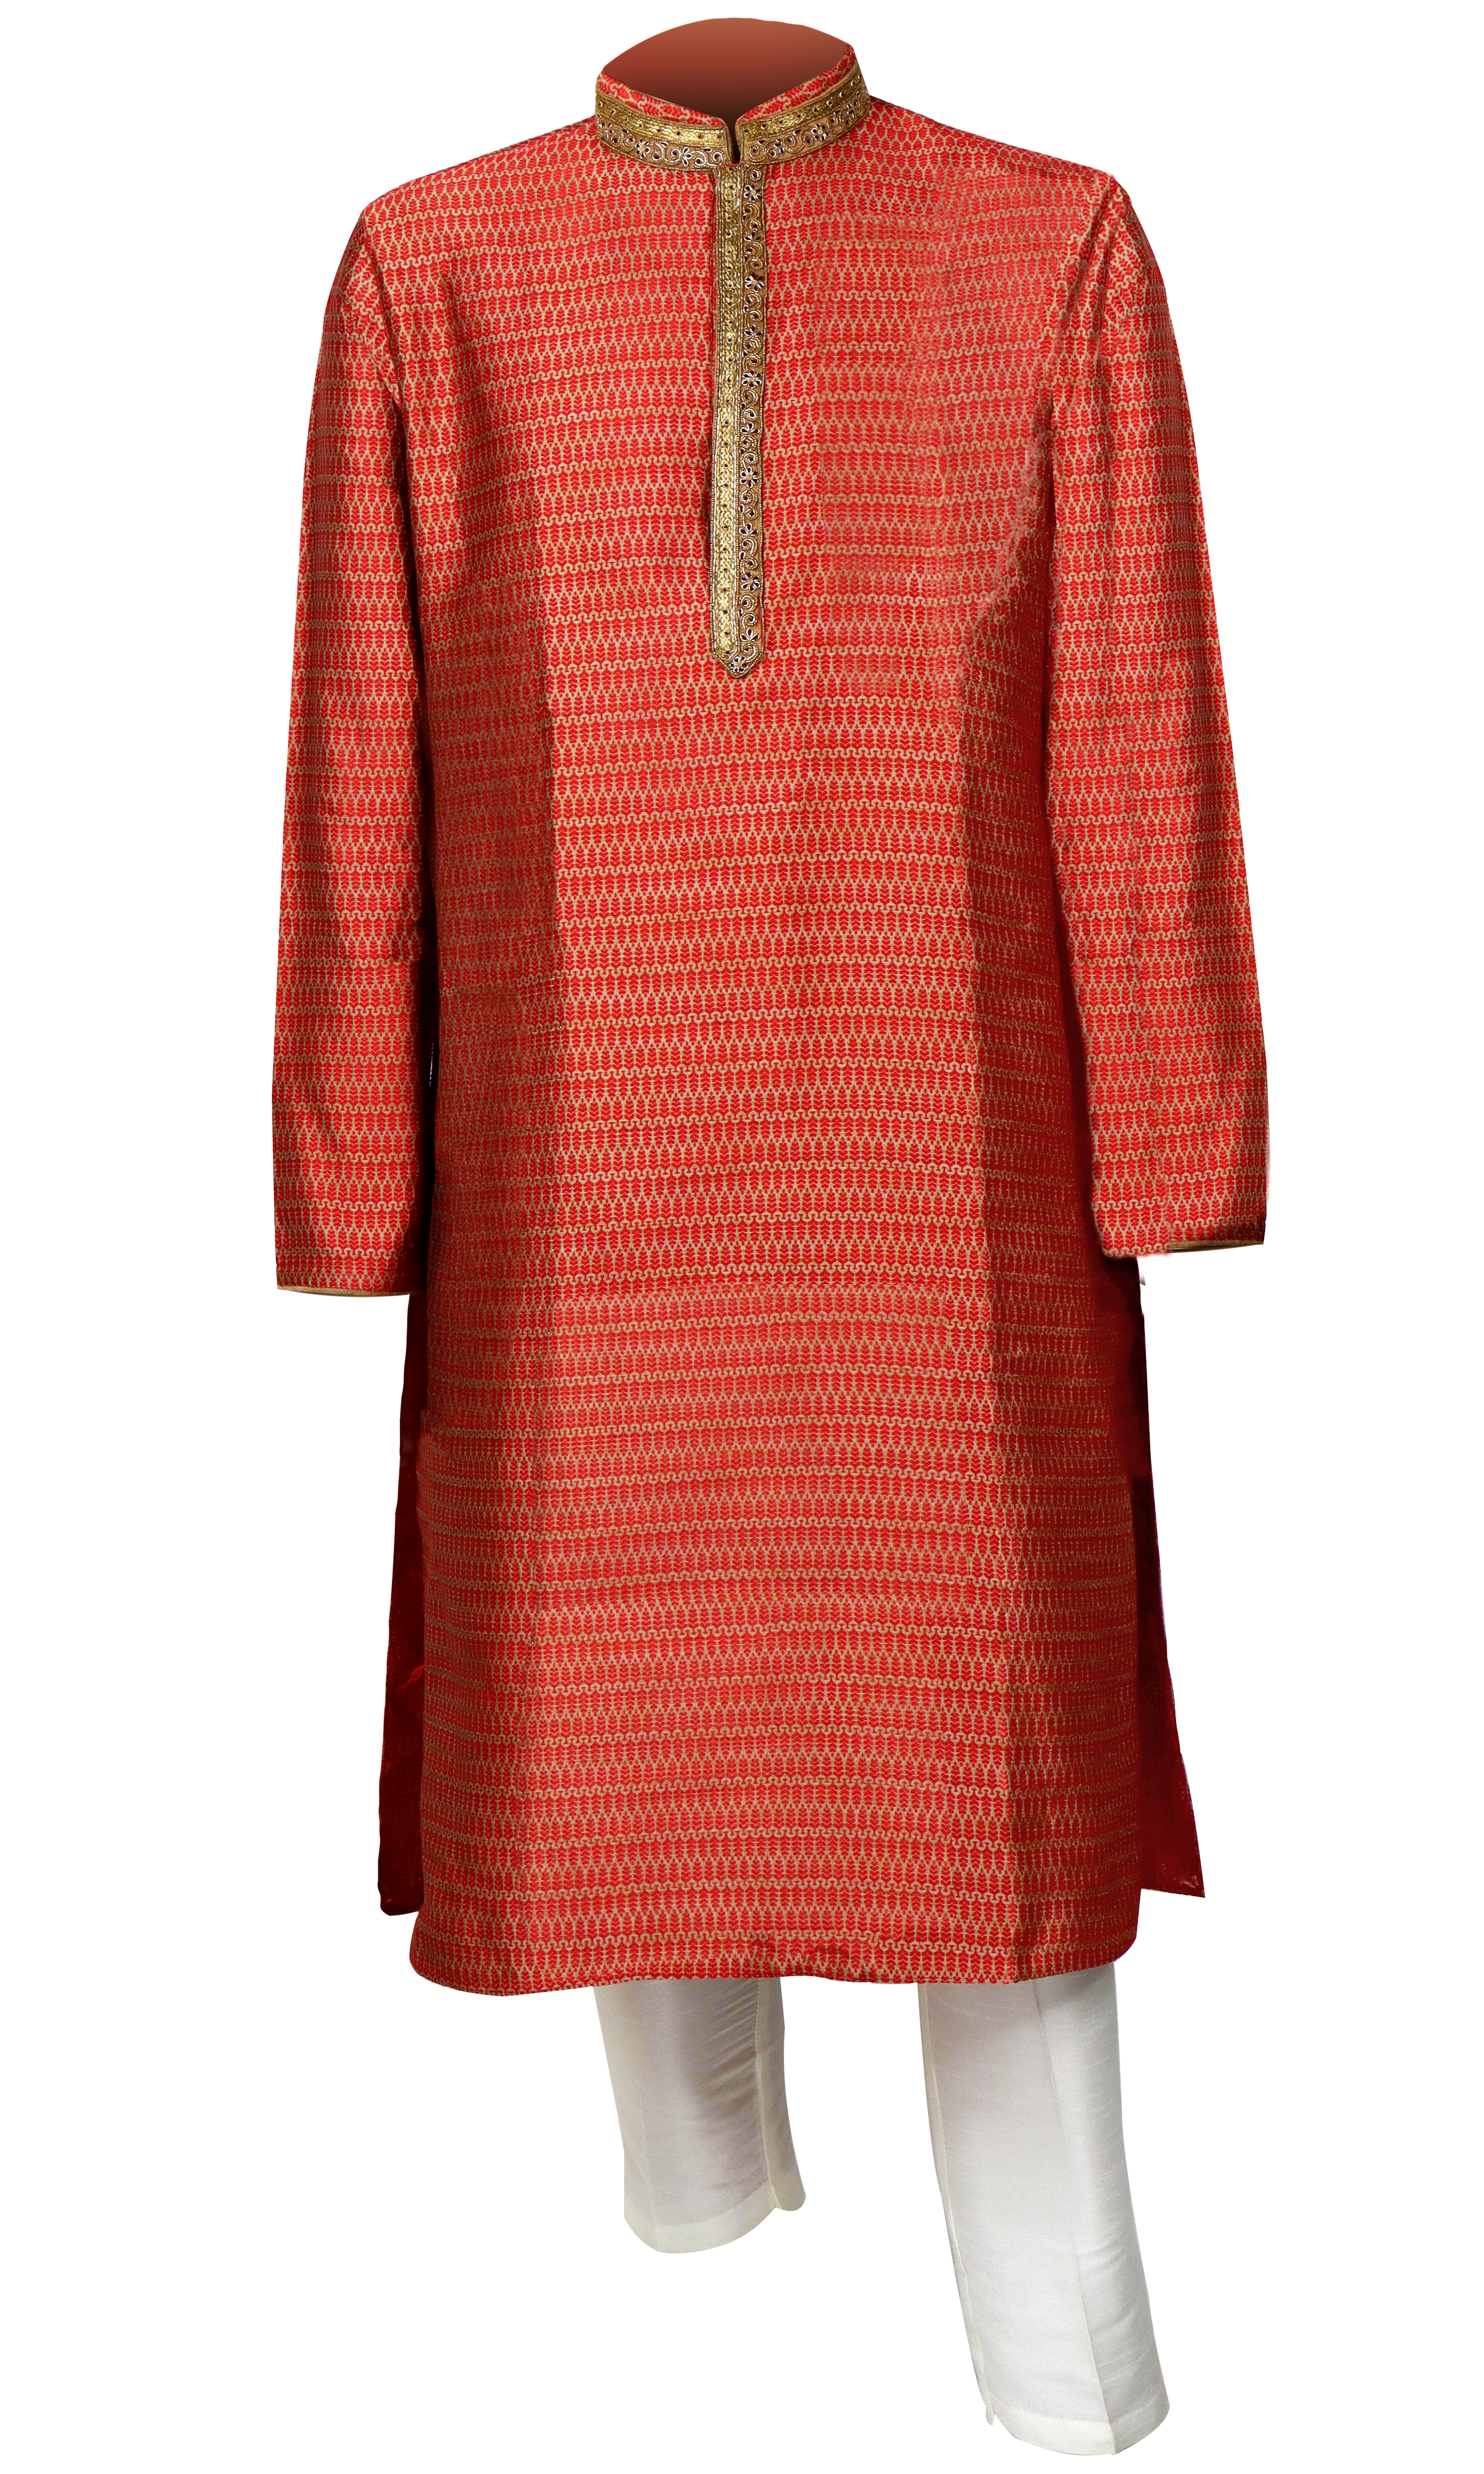 The kurta has gold embroidery and comes with a matching pair of pants!